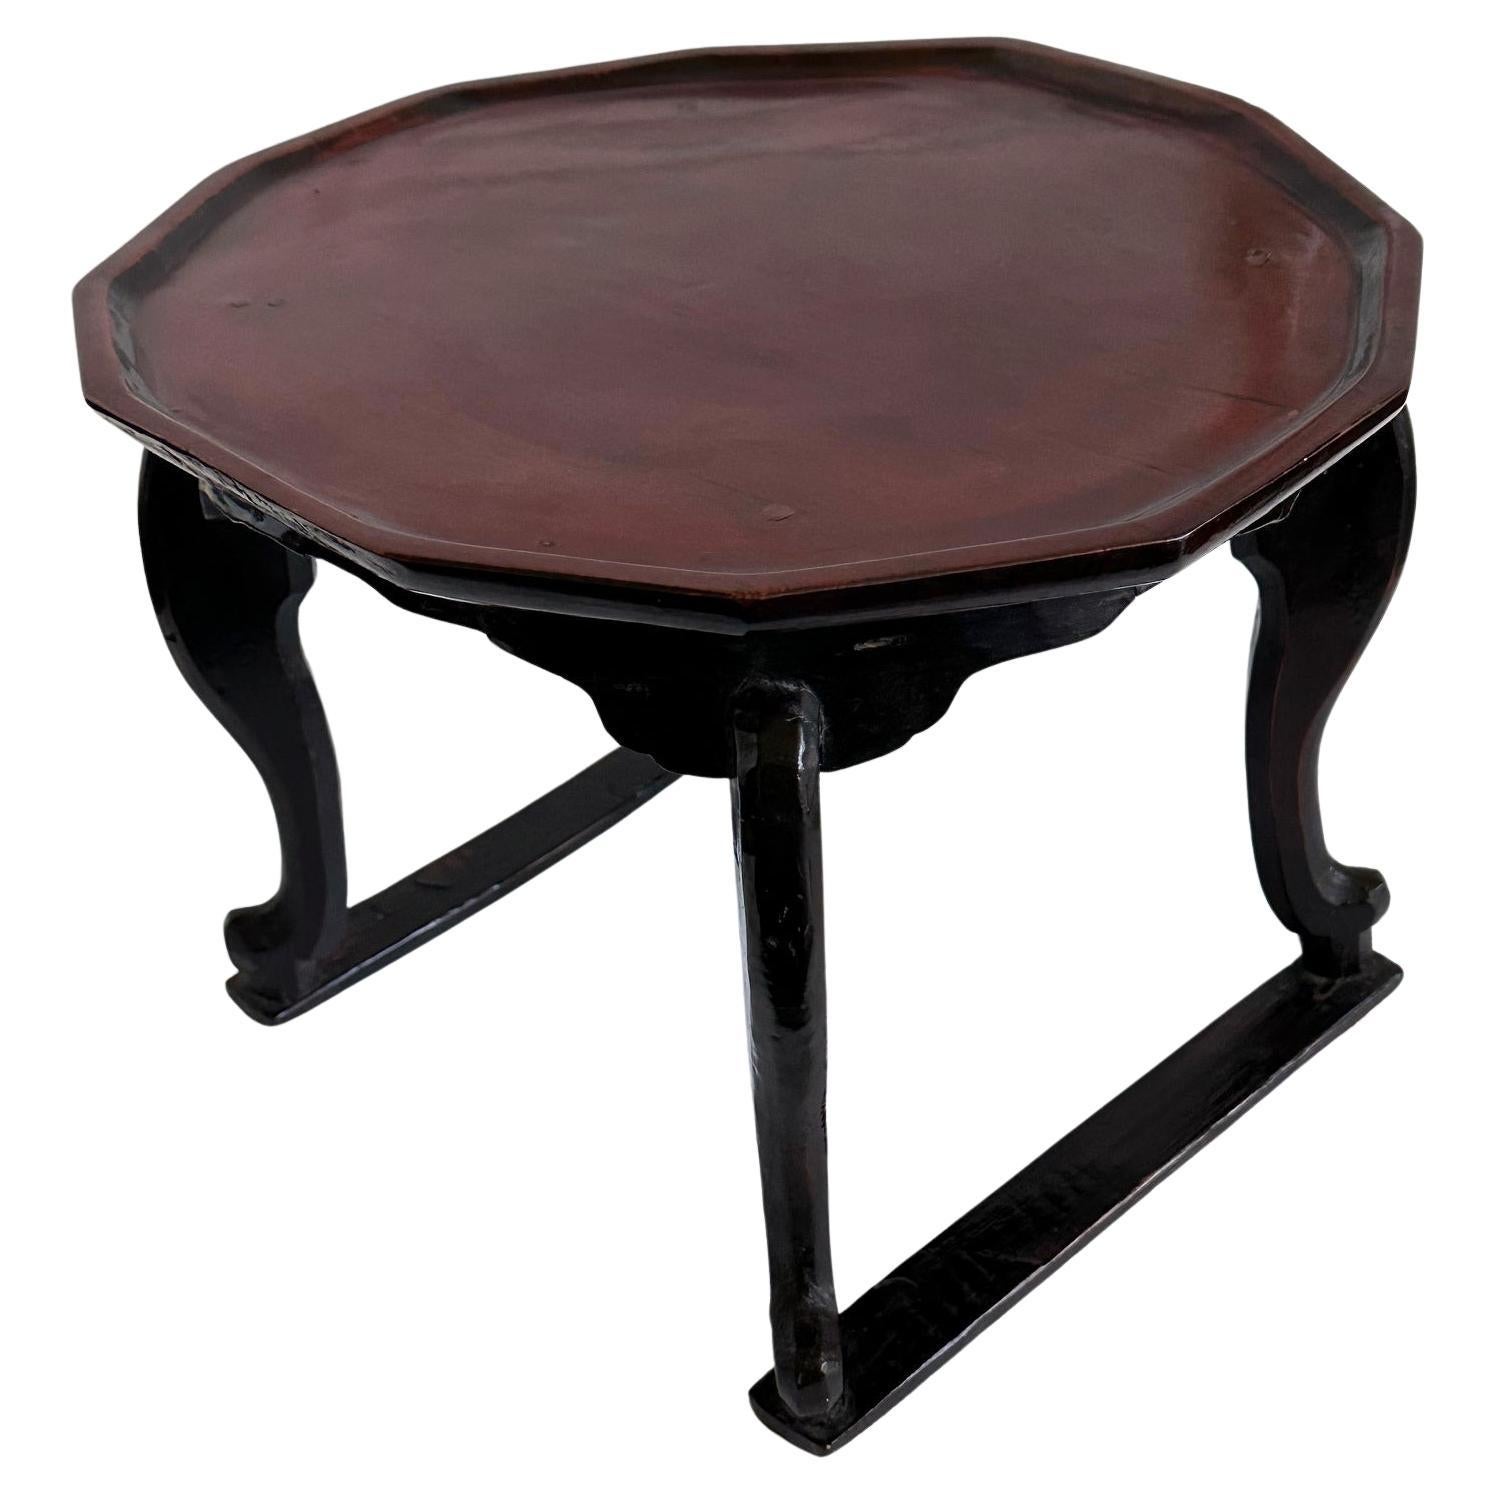 Antique Korean Lacquer Wood Soban Table Joseon Period For Sale